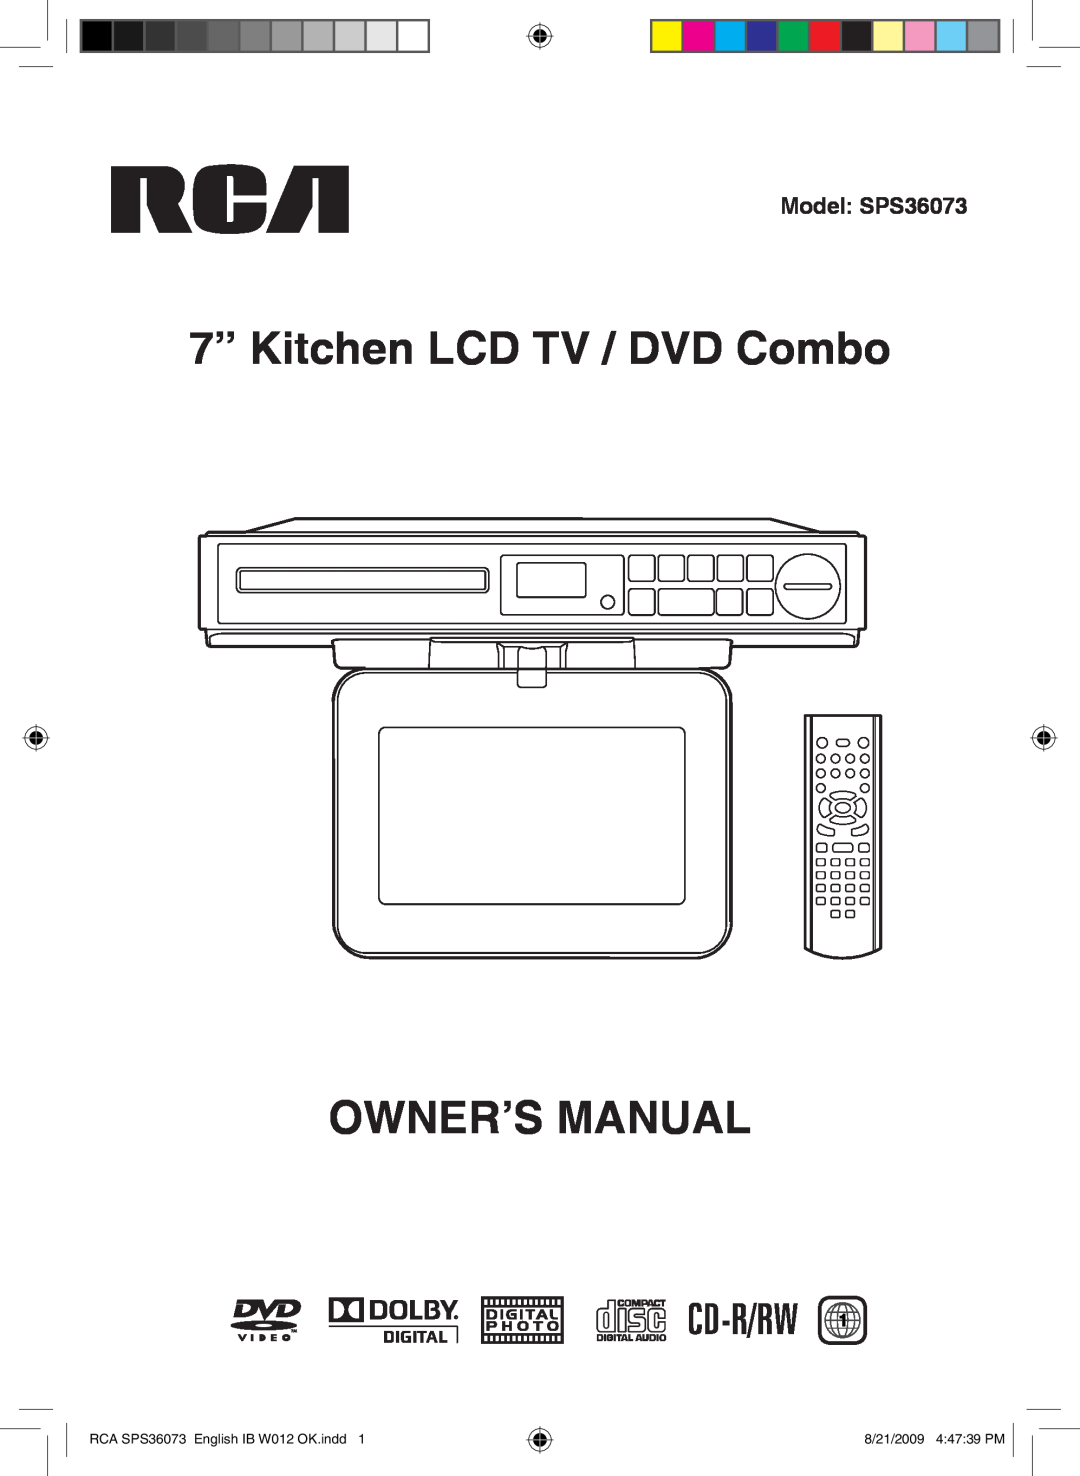 RCA owner manual 7” Kitchen LCD TV / DVD Combo OWNER’S MANUAL, Model SPS36073, RCA SPS36073 English IB W012 OK.indd 